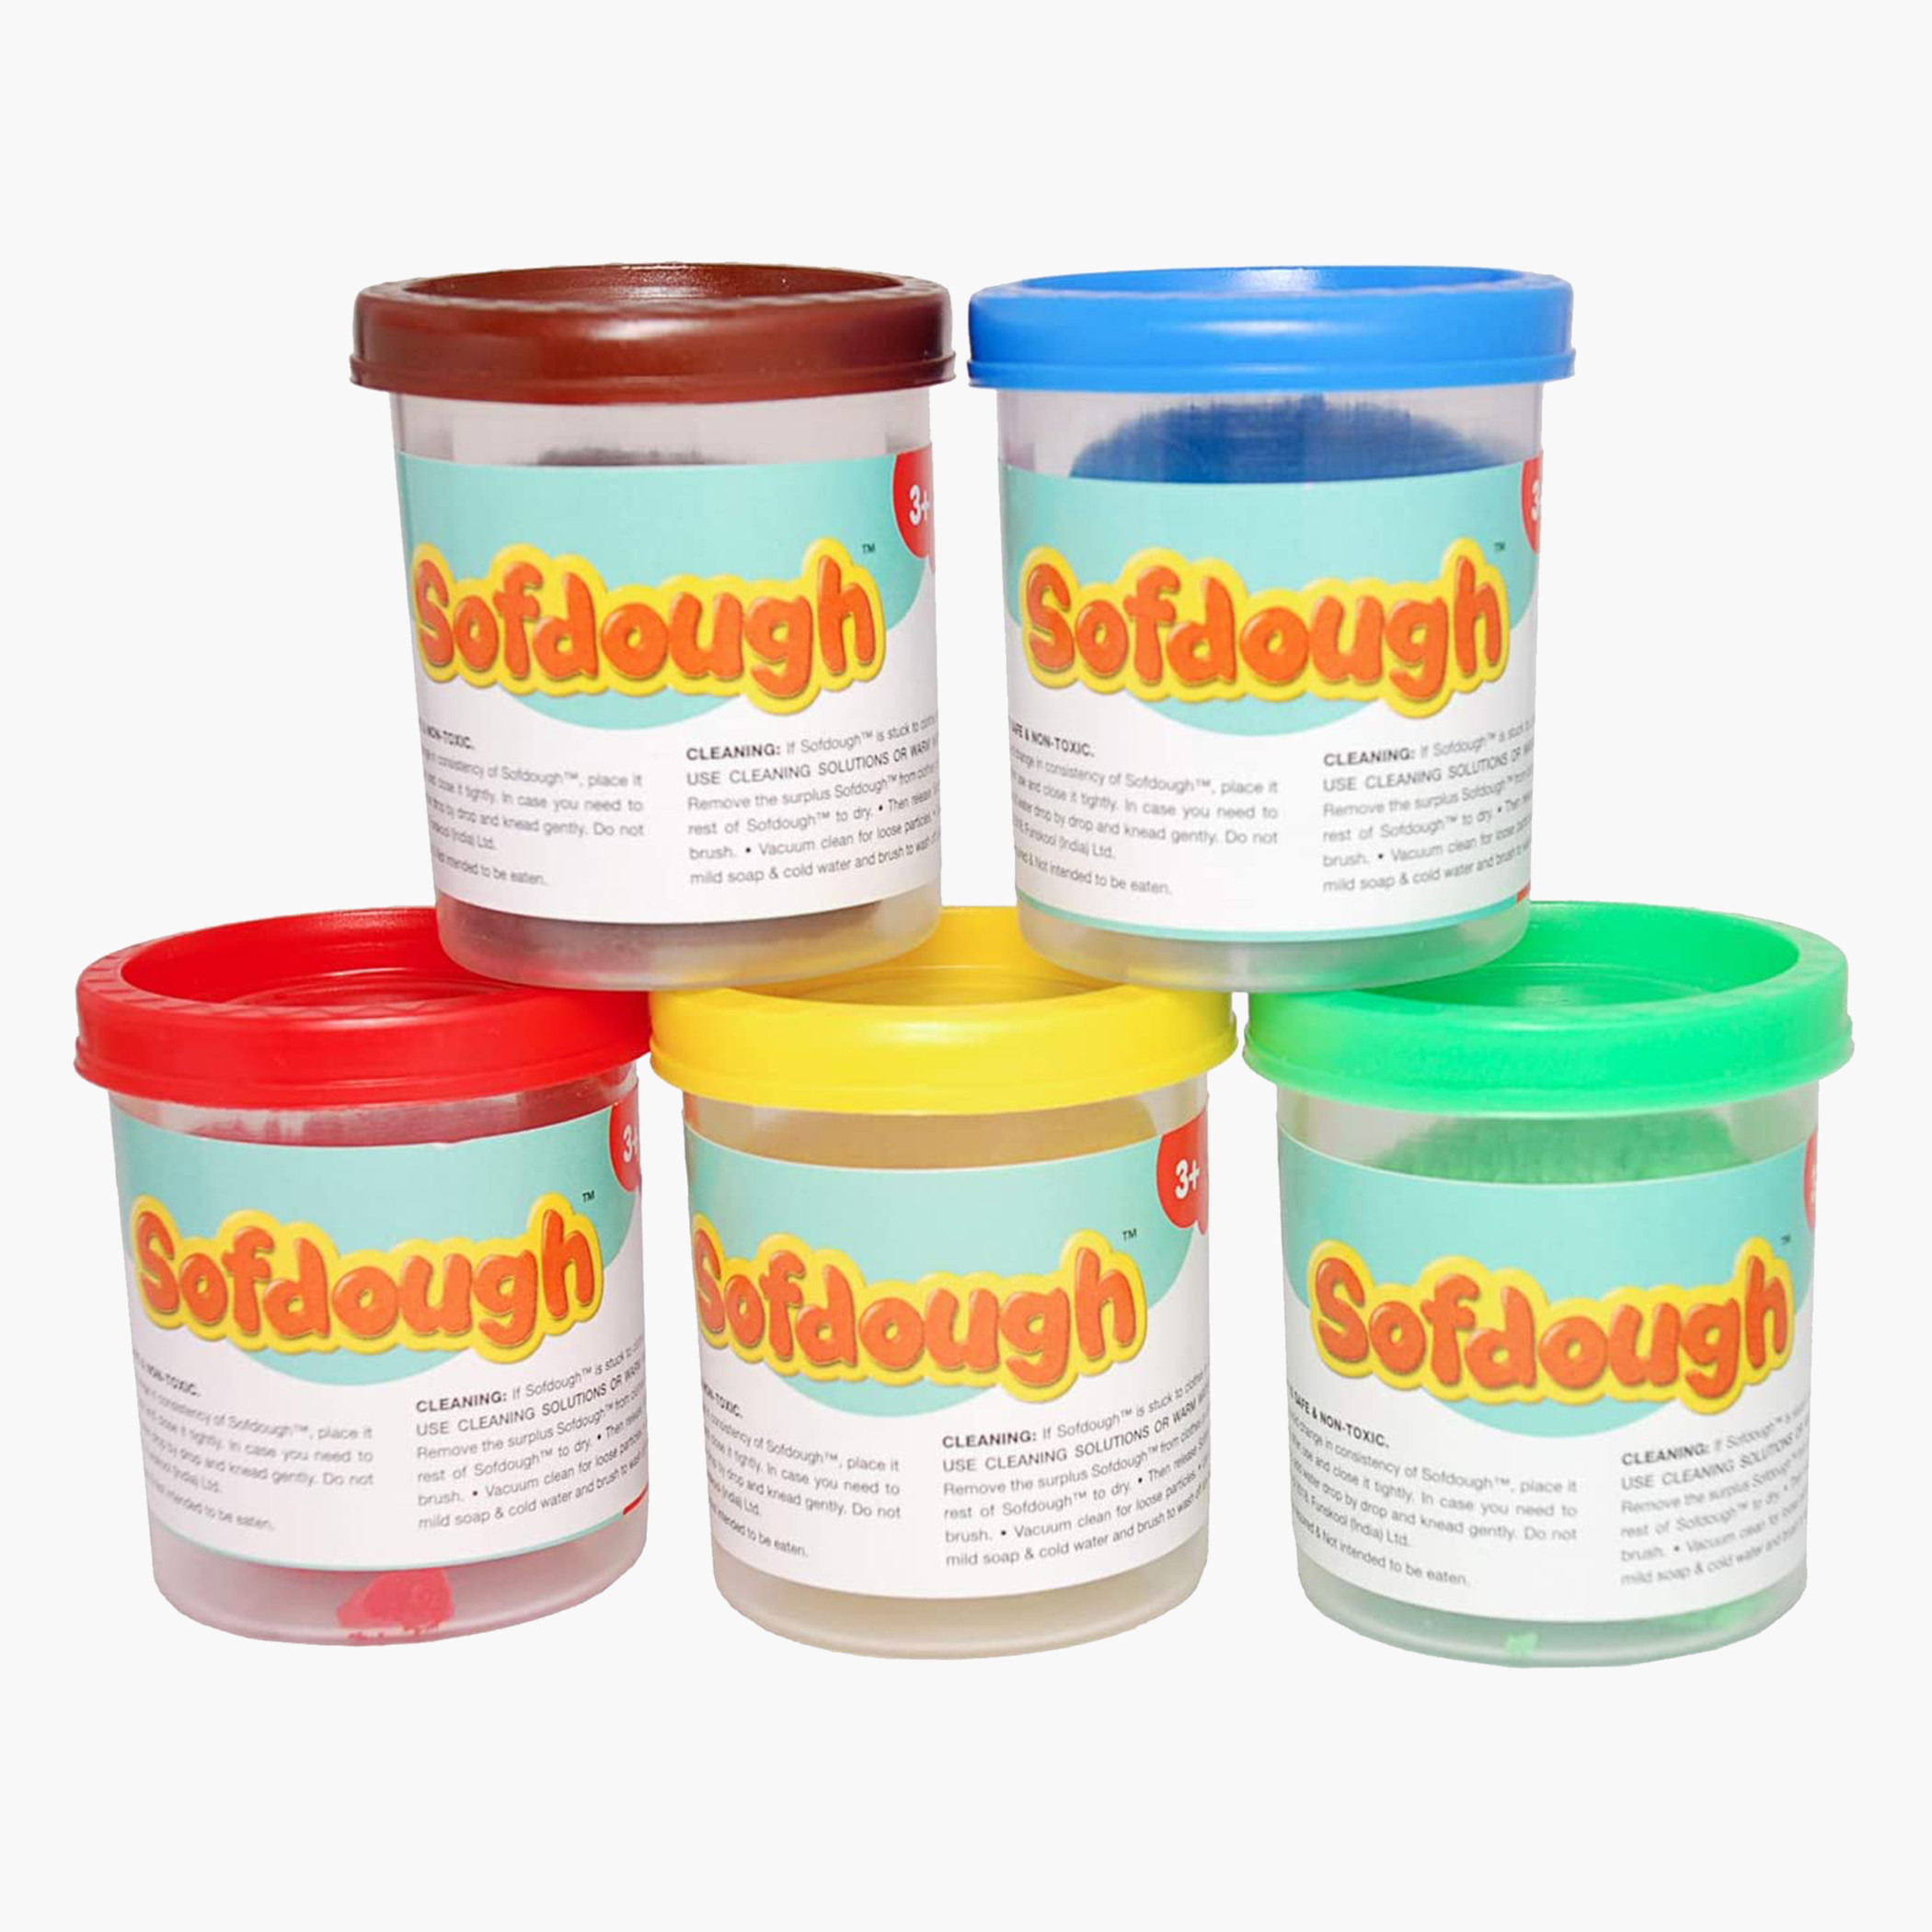 Funskool Play-Doh Fun Factory Clay & Dough for Kids age 3Y+